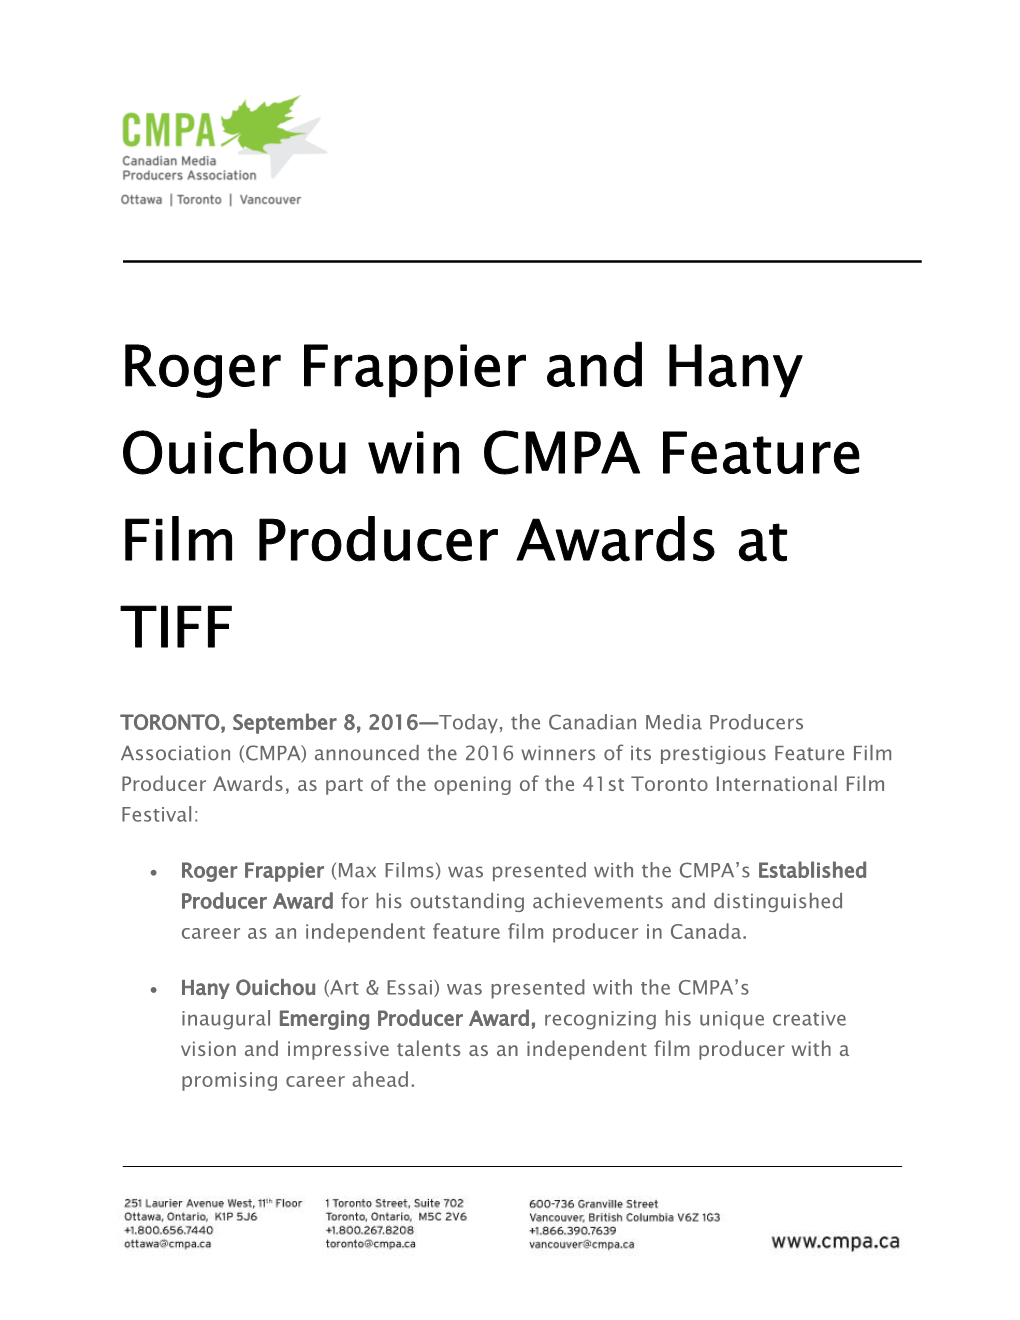 Roger Frappier and Hany Ouichou Win CMPA Feature Film Producer Awards at TIFF